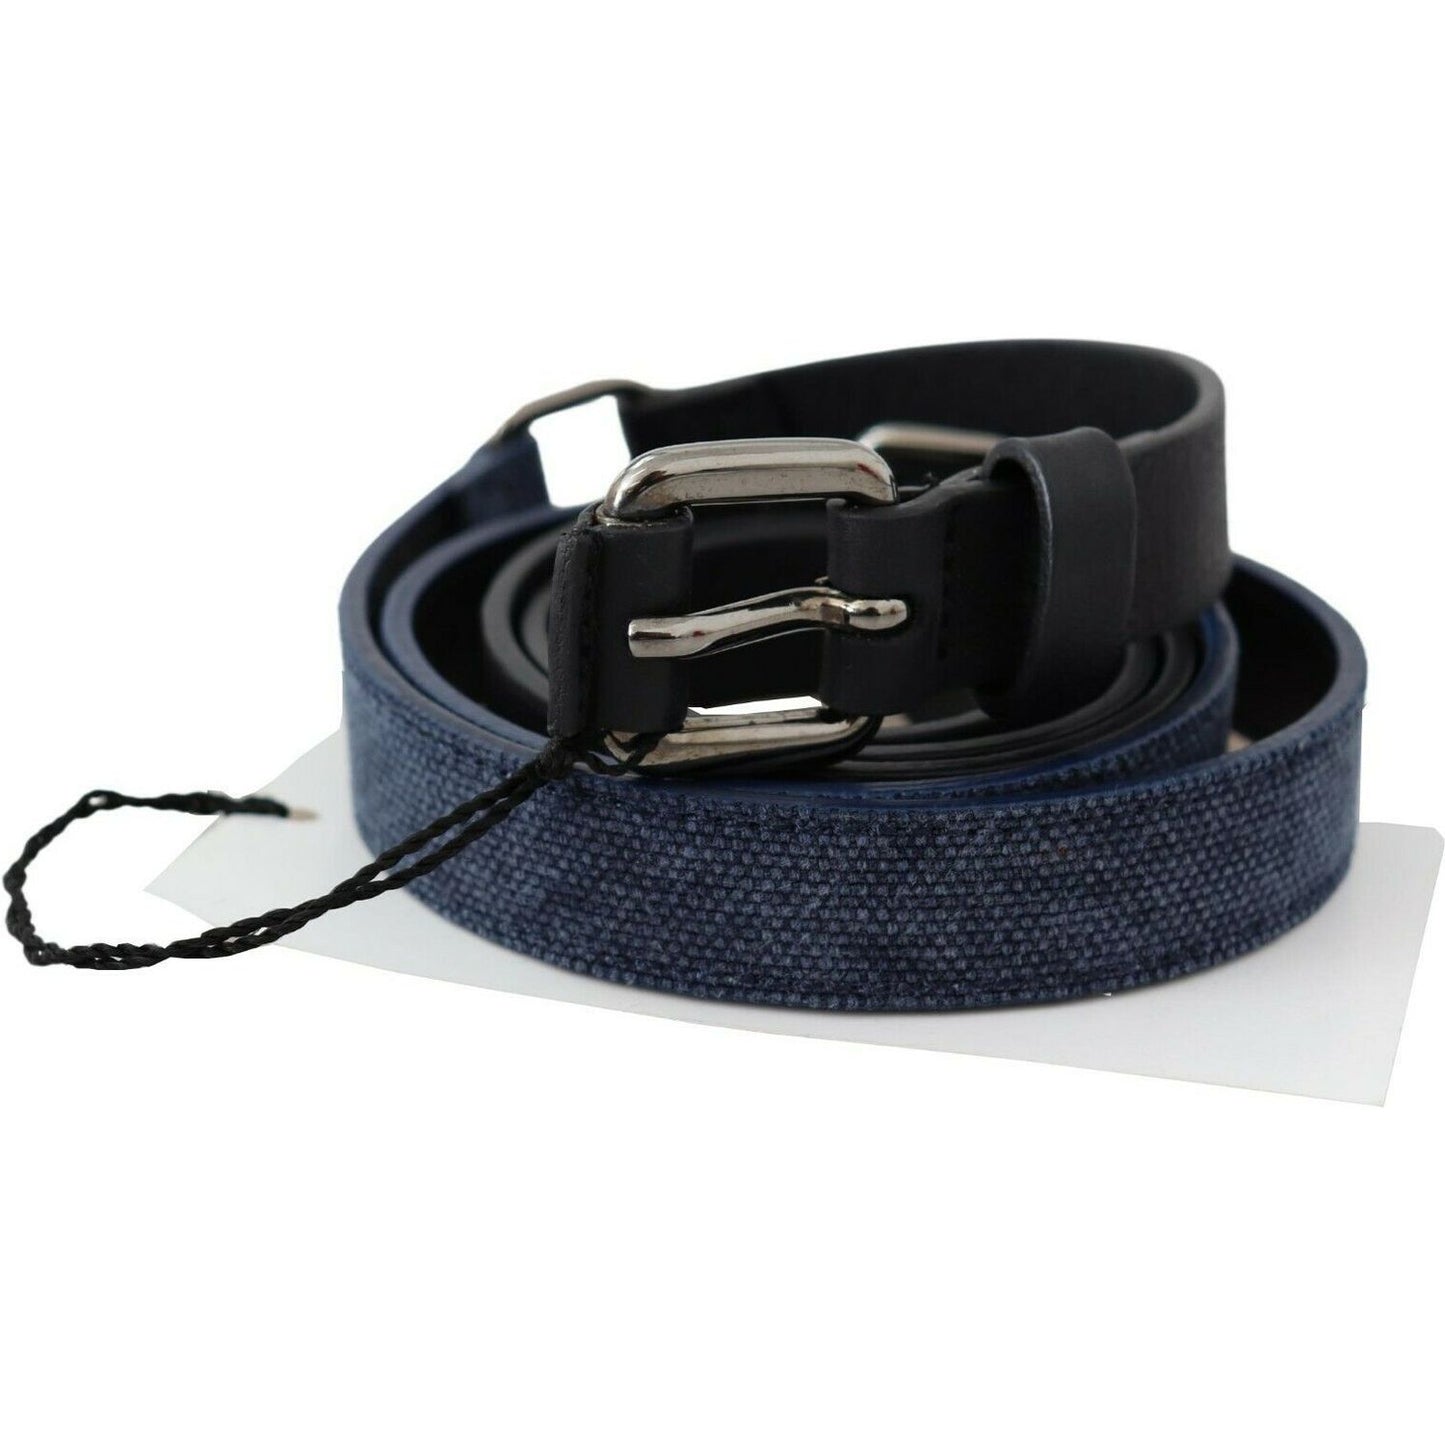 Costume National Black Blue Leather Silver Logo Belt black-blue-leather-silver-logo-belt WOMAN BELTS s-l1600-92-ed475a02-7b8.jpg